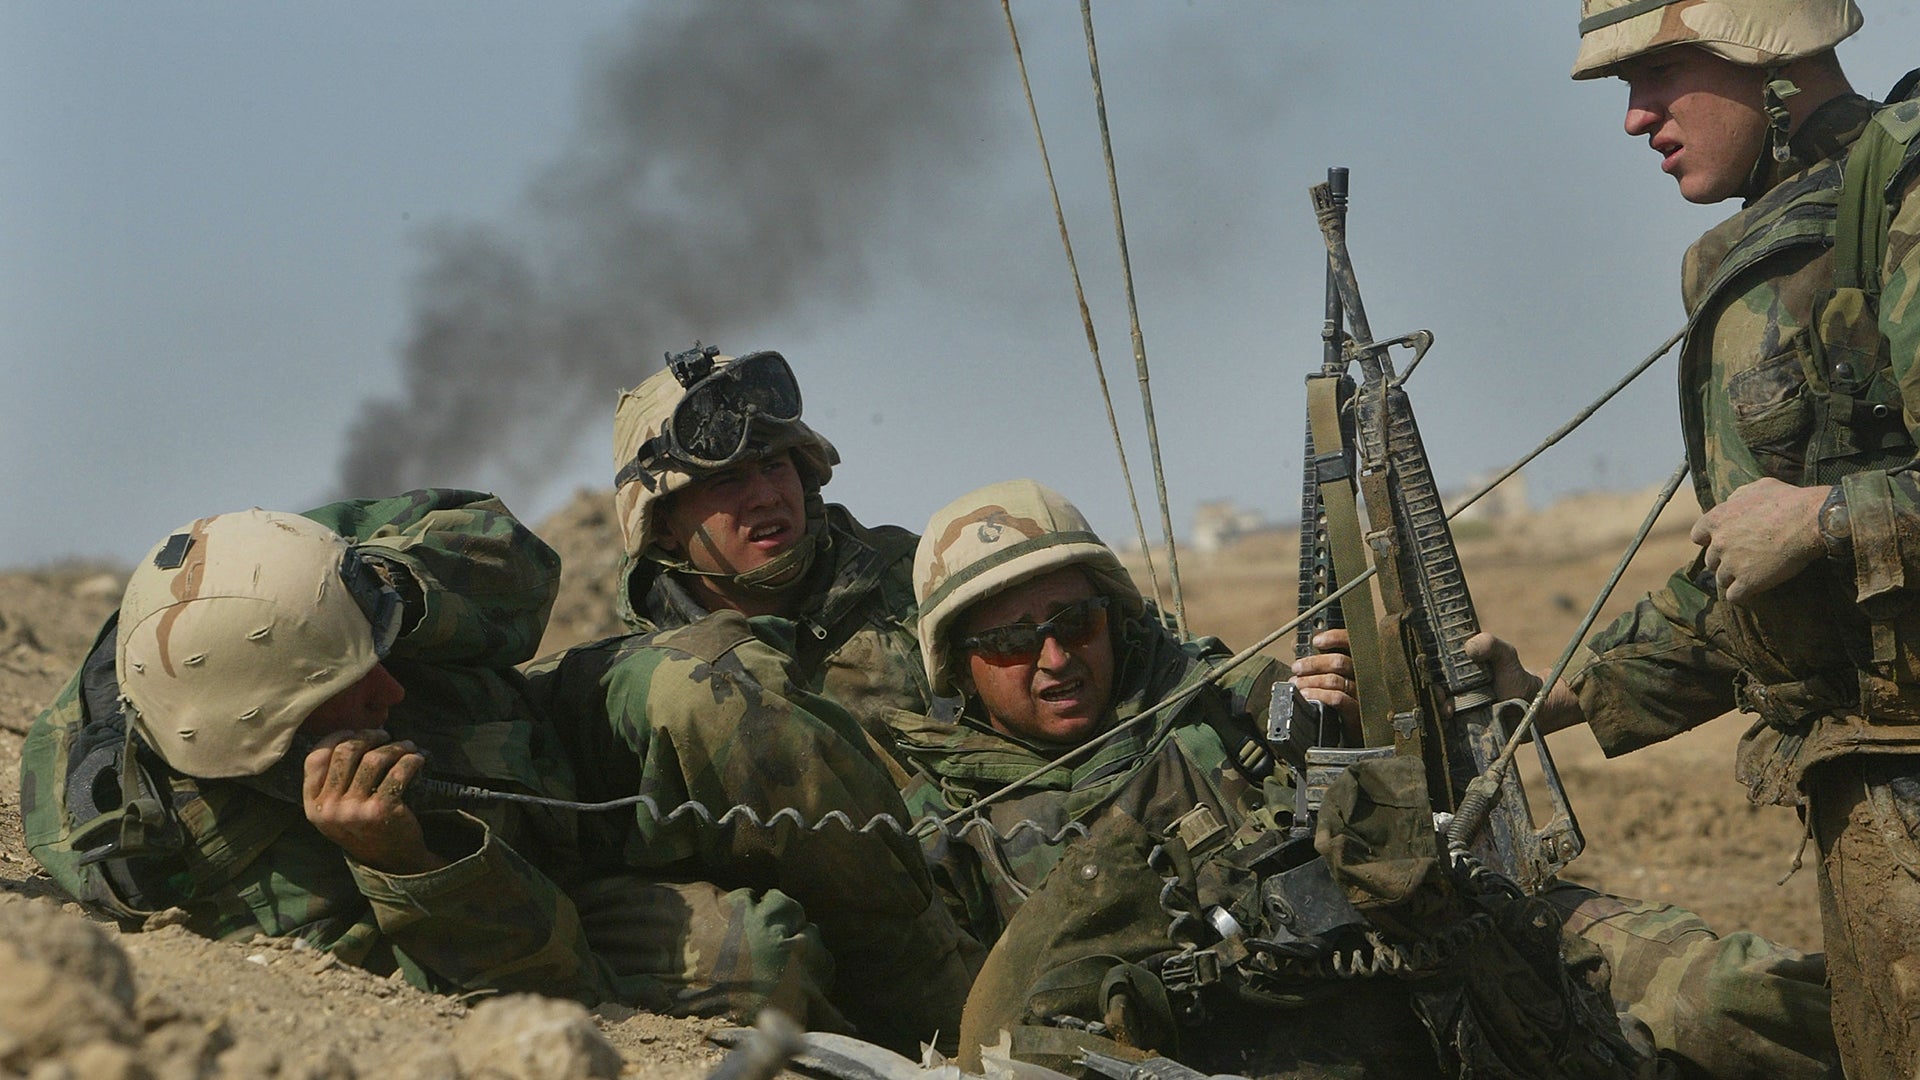 NASIRIYAH, IRAQ - MARCH 23: U.S. Marines from 1 / 2 Charlie Co. of Task Force Tarawa keep low, as they battle with Iraqi forces March 23, 2003 in the southern Iraqi city of Nasiriyah. The Marines suffered a number of deaths and casualties during gun battles throughout the city. (Photo by Joe Raedle/Getty Images)